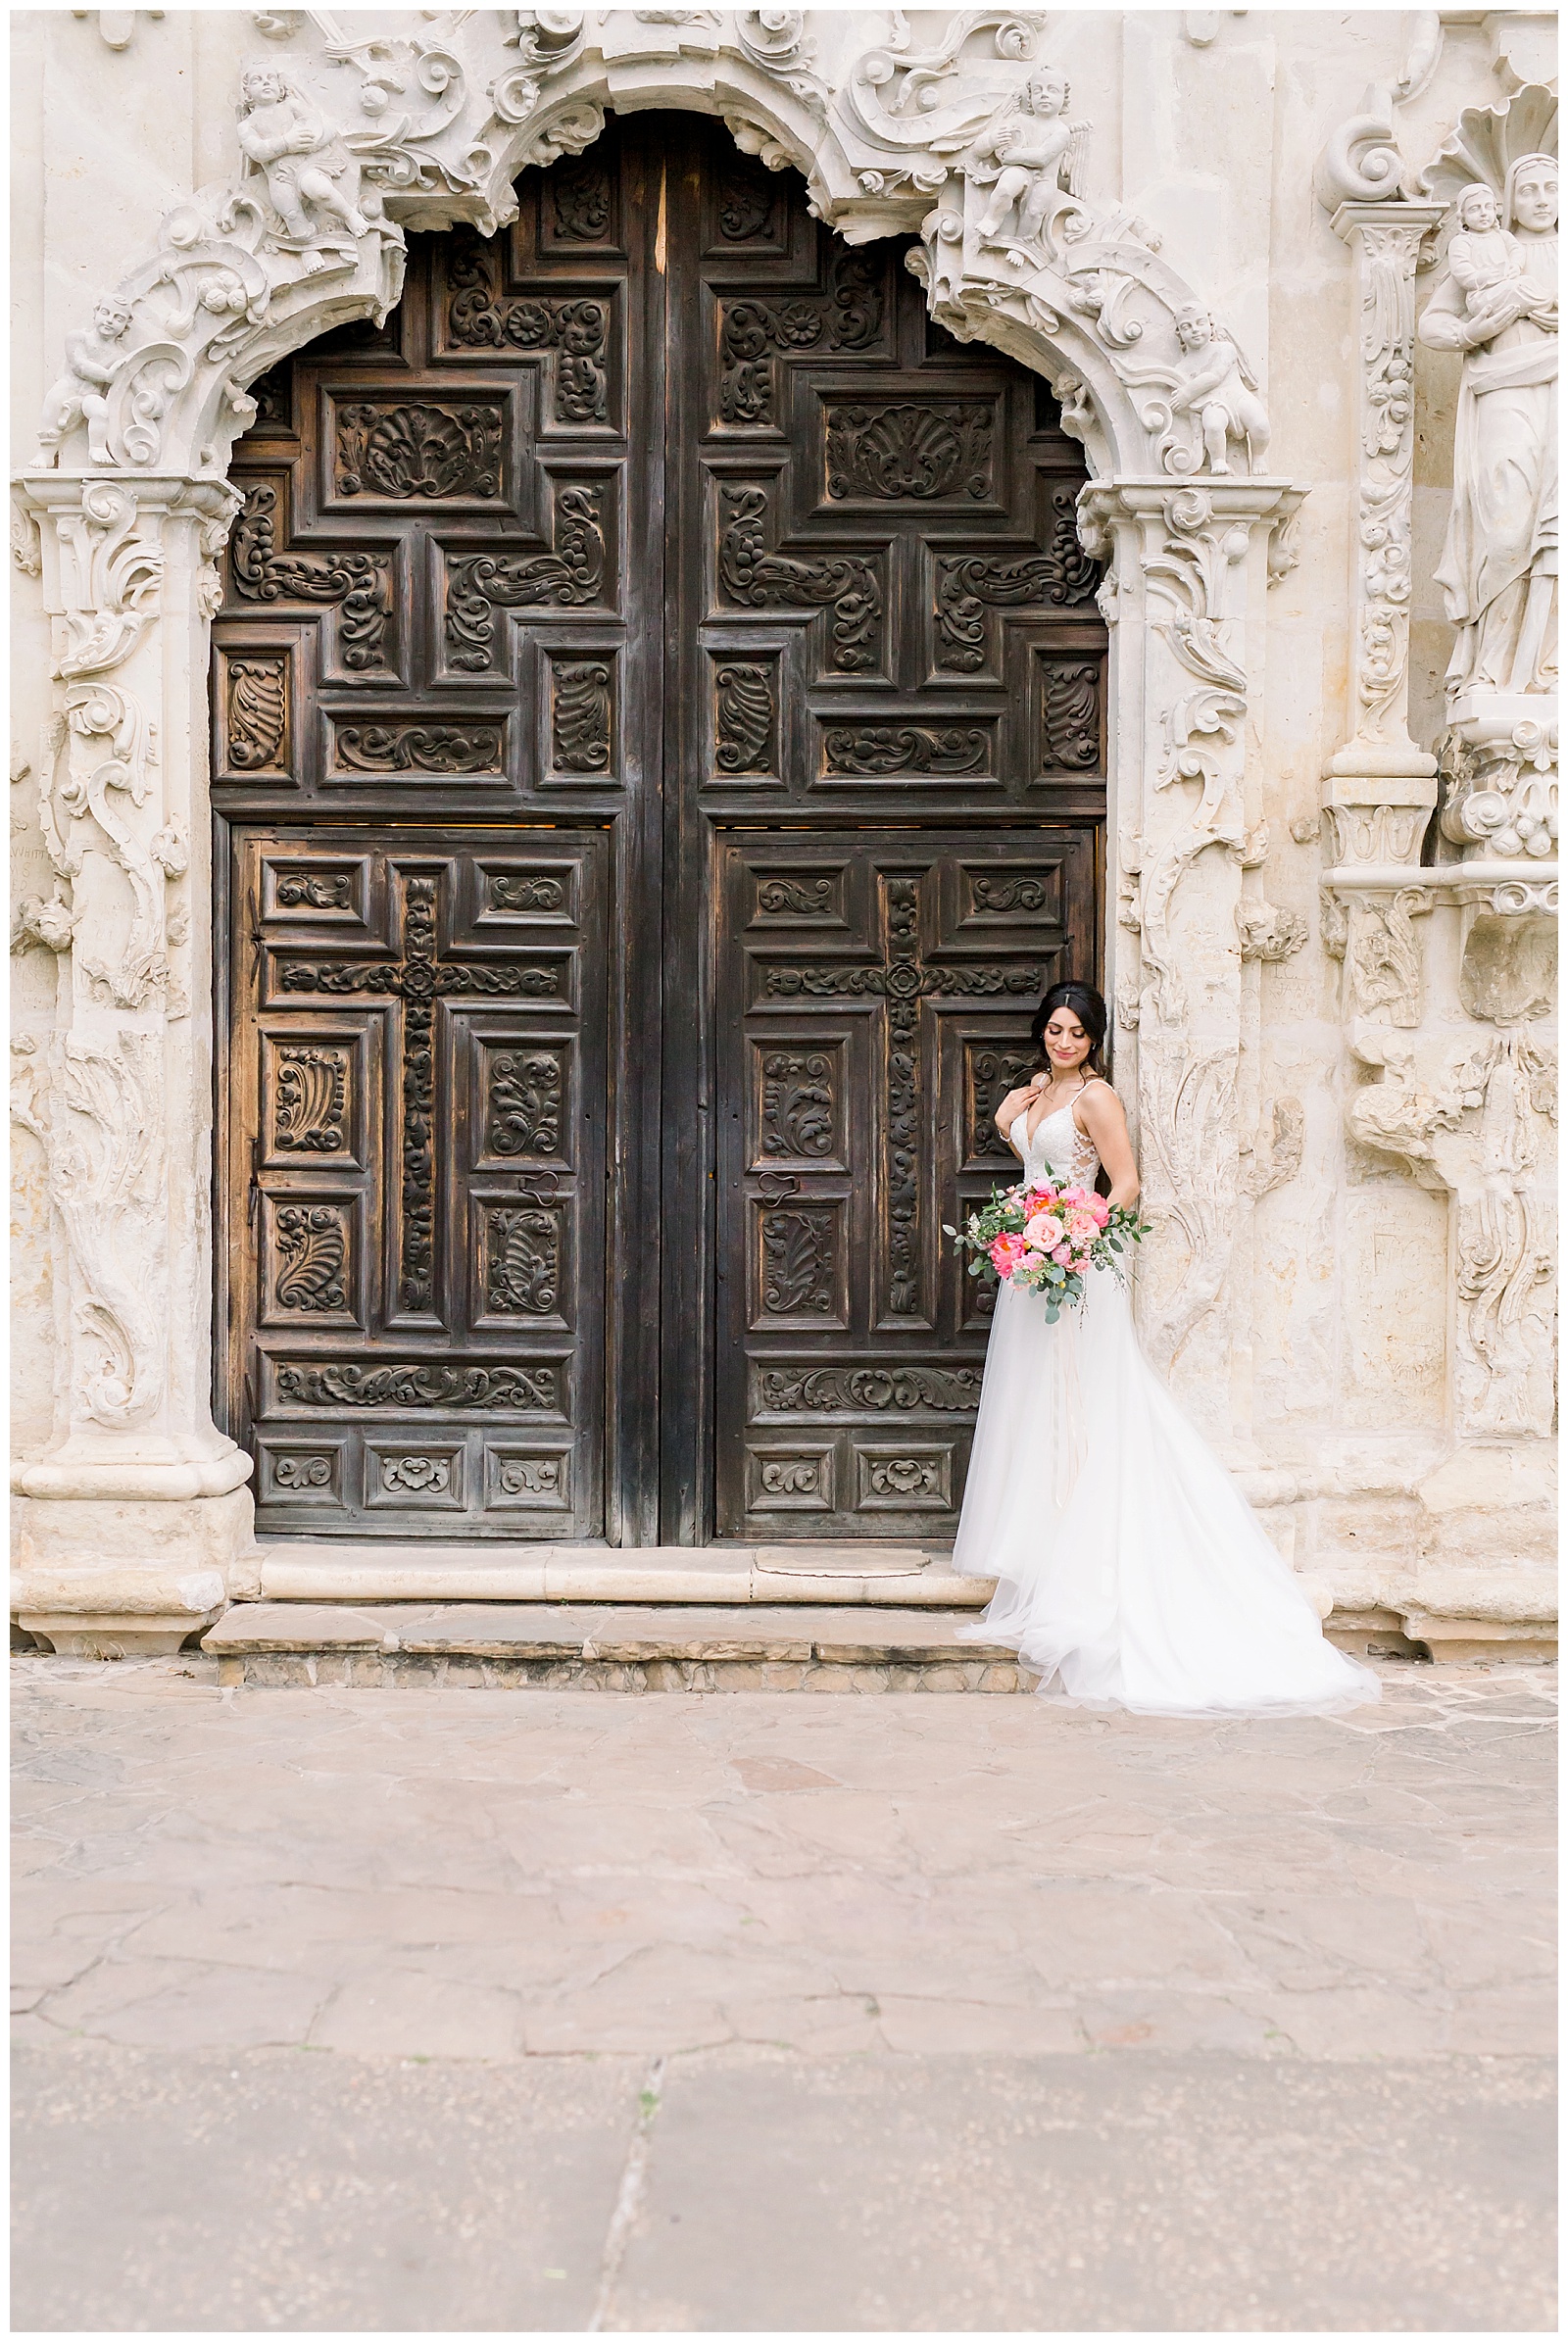 romantic bridal portraits for her Spanish Missions Bridal Portraits in San Antonio, TX with Monica Roberts Photography | www.monicaroberts.com